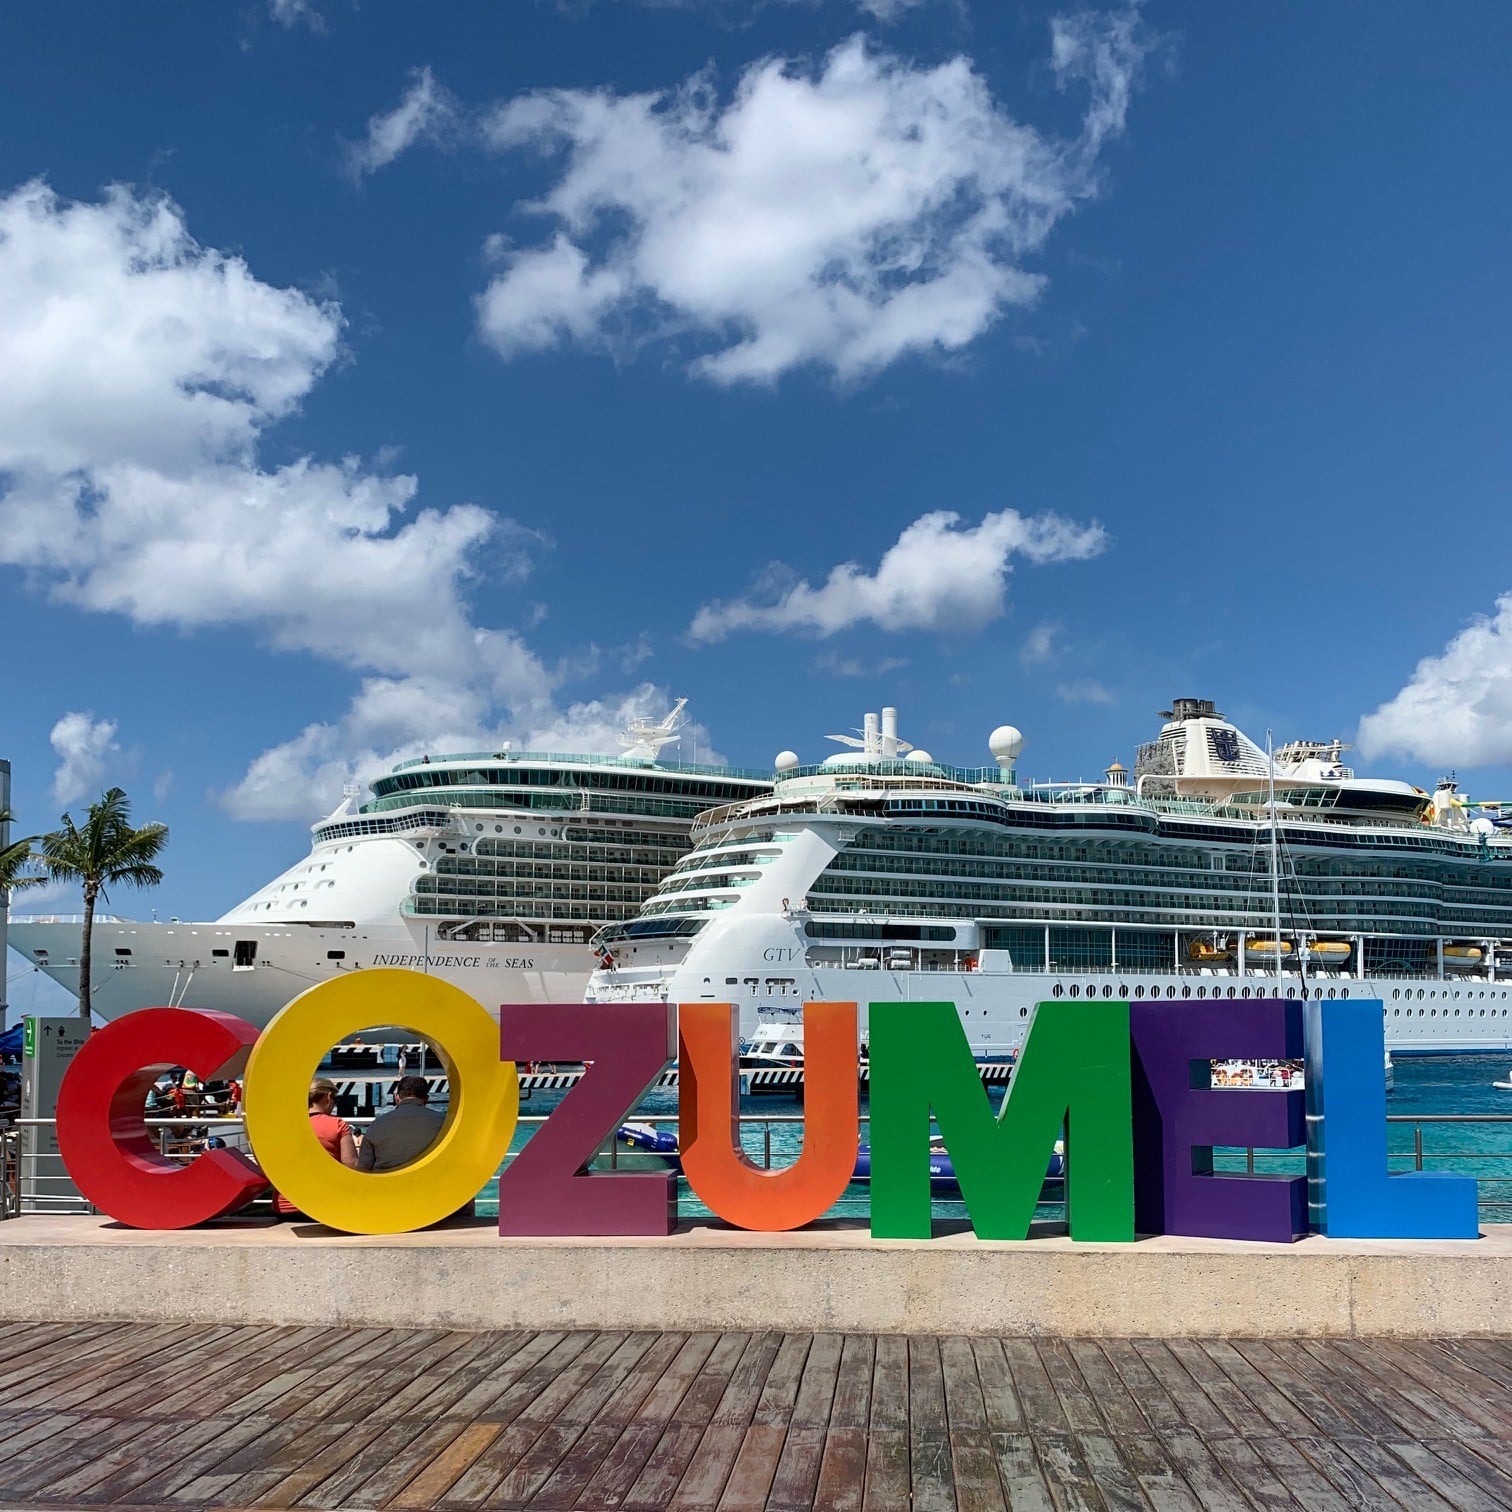 When Tara Met Blog: What to do in Cozumel Without a Shore Excursion